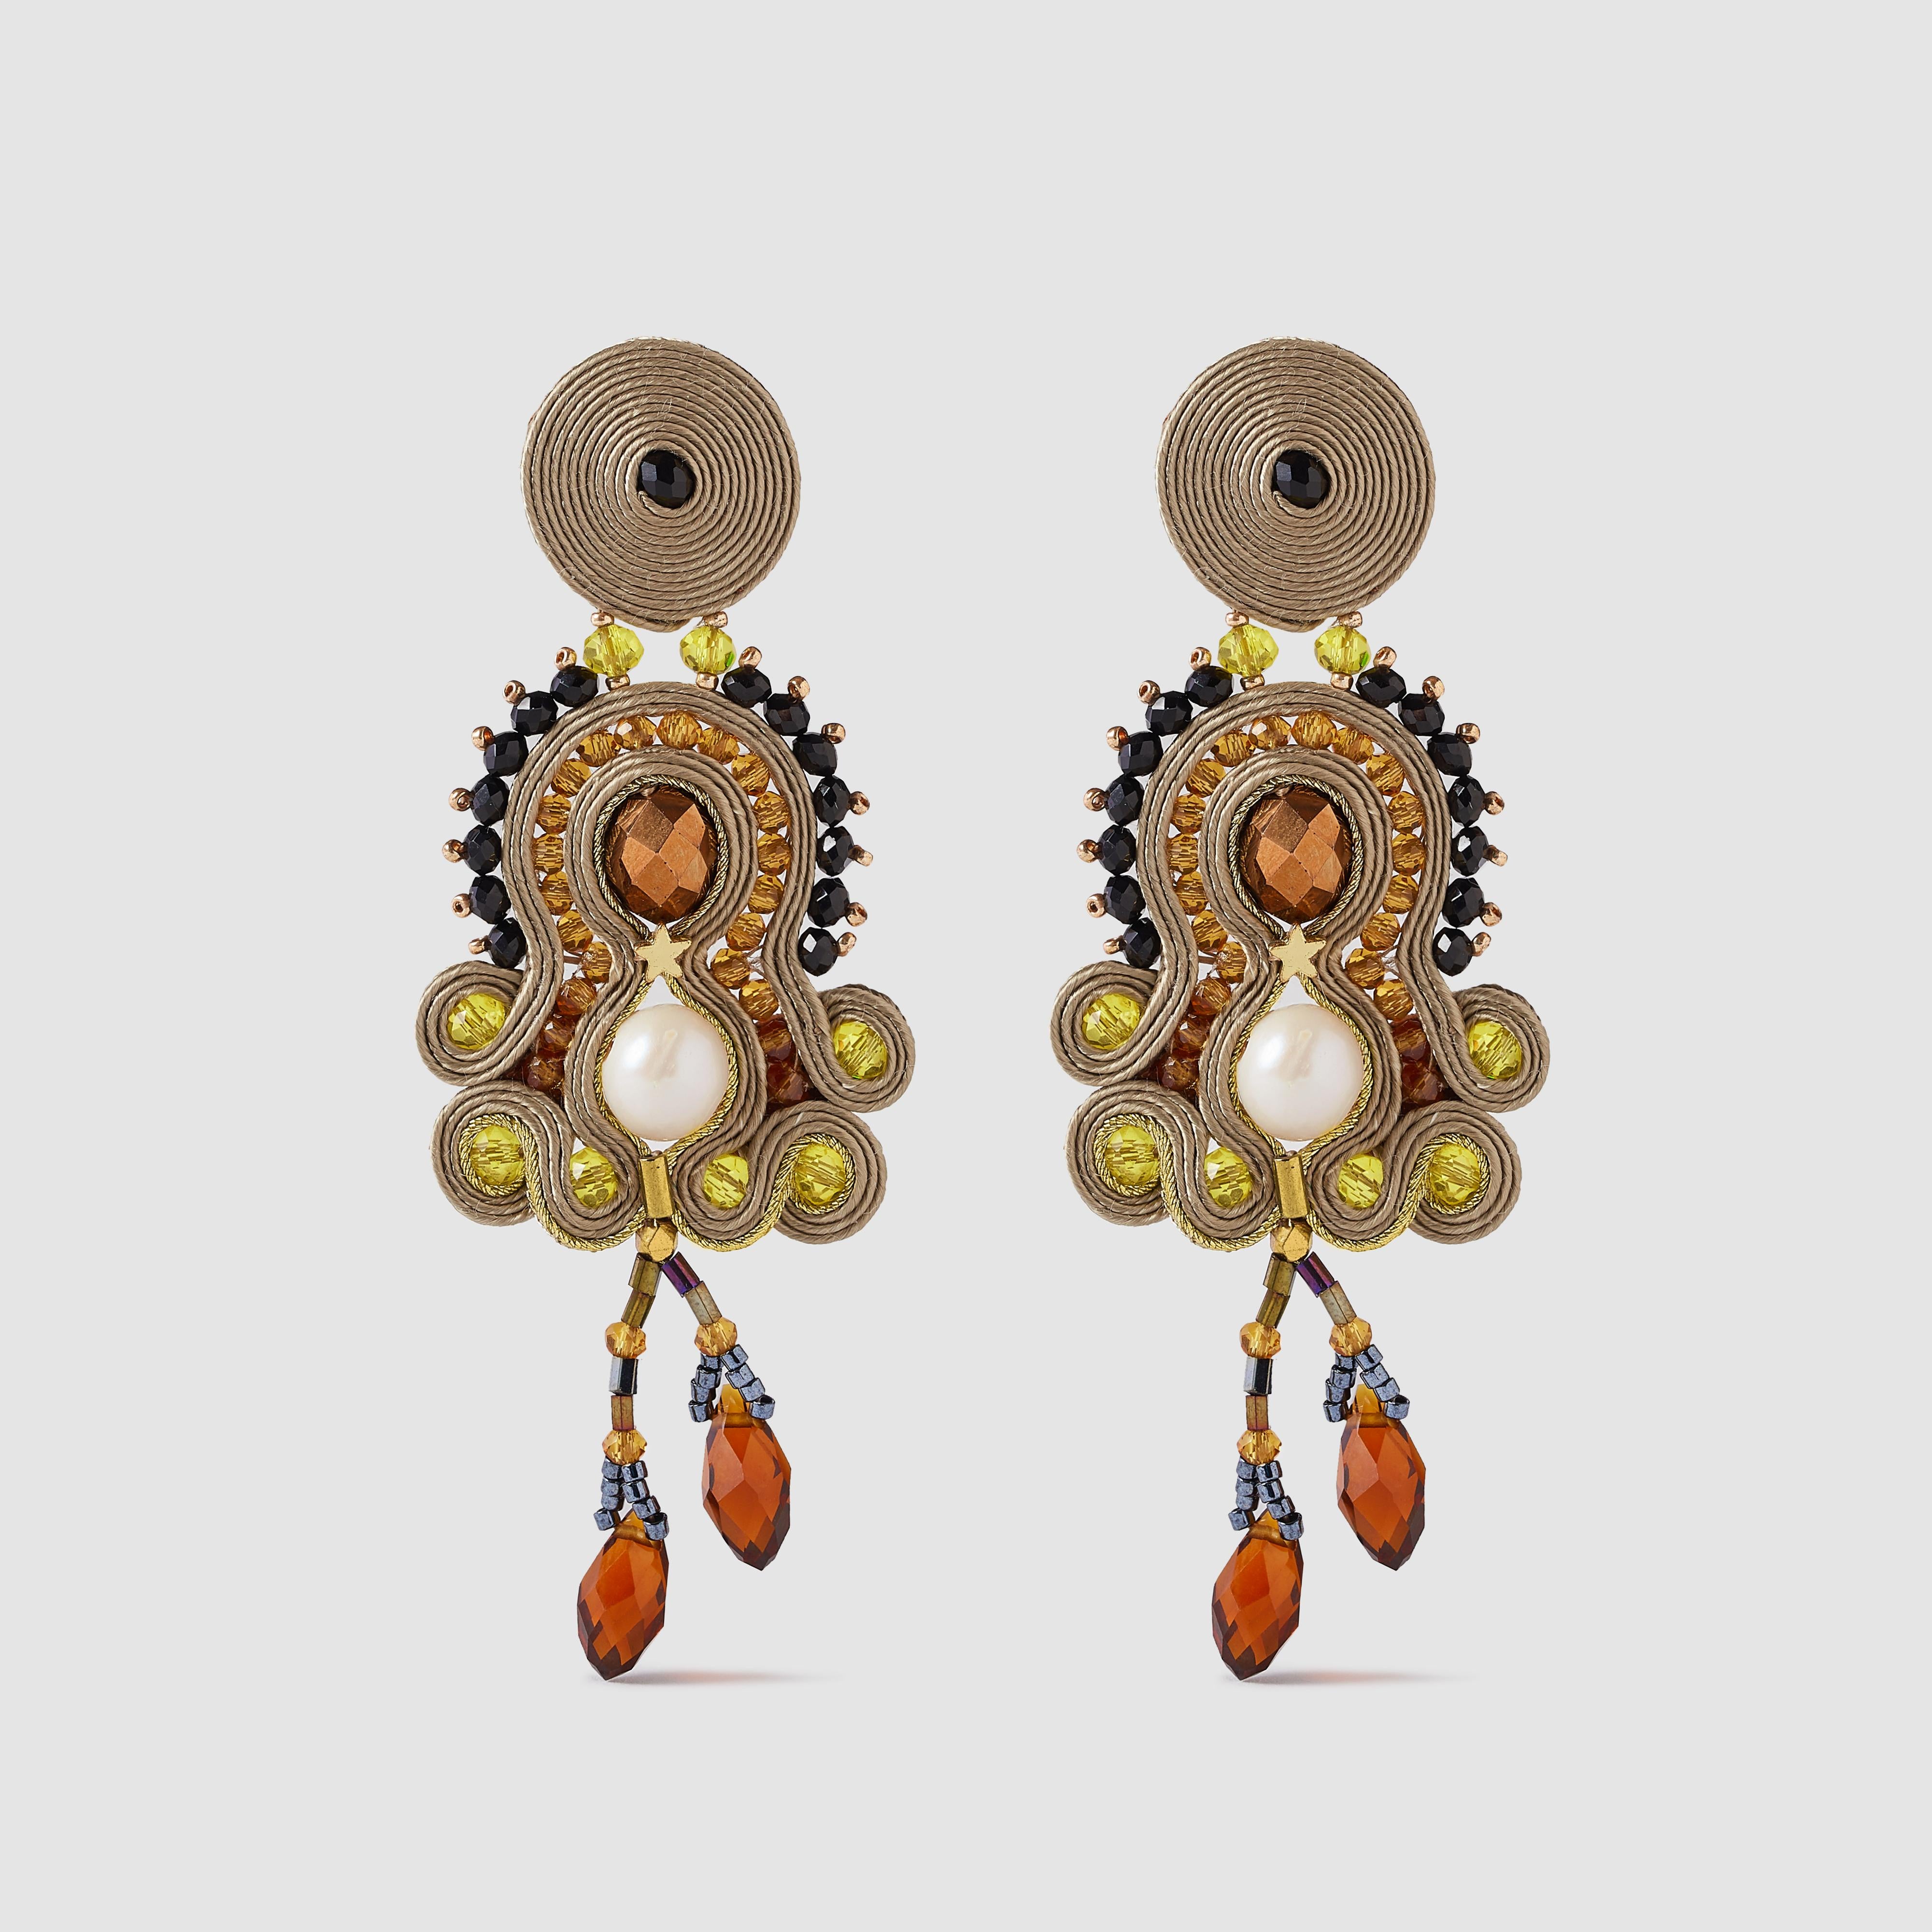 Musula Personalissima Nicoletta Sand Soutache Earrings
Soutache earrings made with silk rayon and crystal beads & silver closure

Hand-sewn earrings.
Rayon yarn 2mm.
River pearls, hematite and glass beads.
Silver nut XL
Length 9cm 
Ultralight,